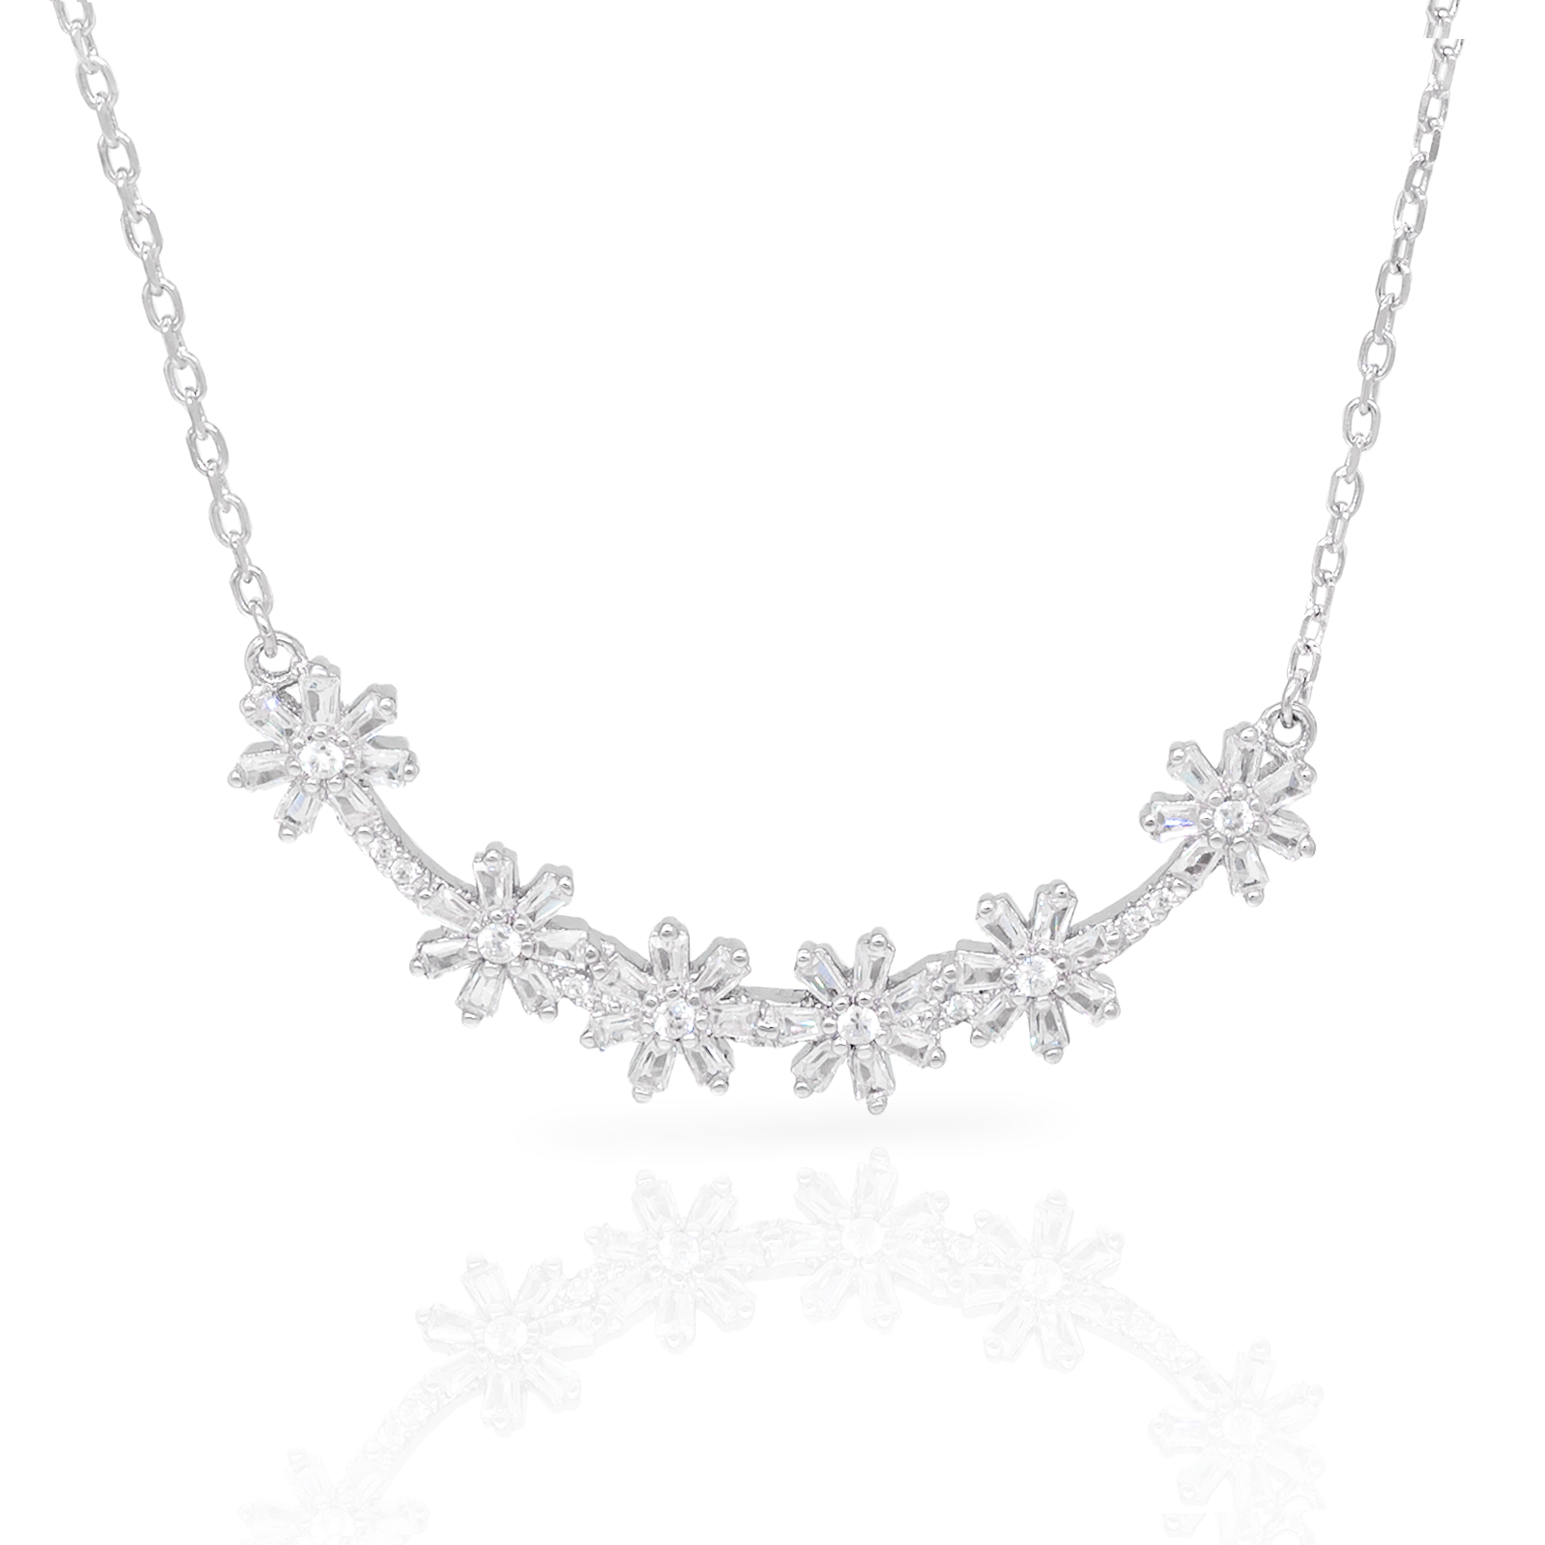 Chrystal Daisies, Sterling Silver Necklace with Cubic Zirconia